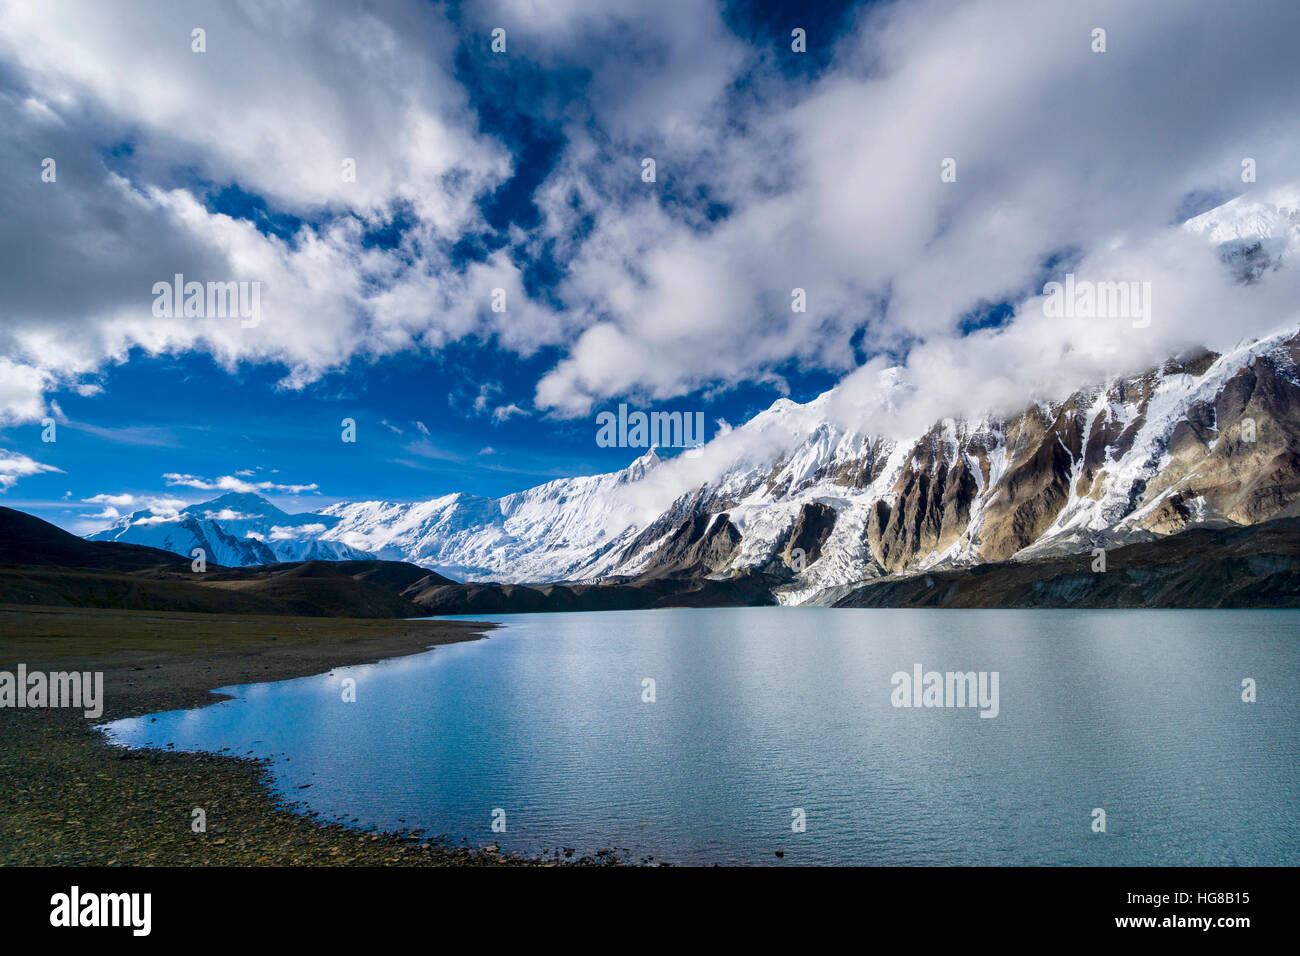 Tilicho Lake with snow-covered mountains, Manang, Manang District, Nepal Stock Photo